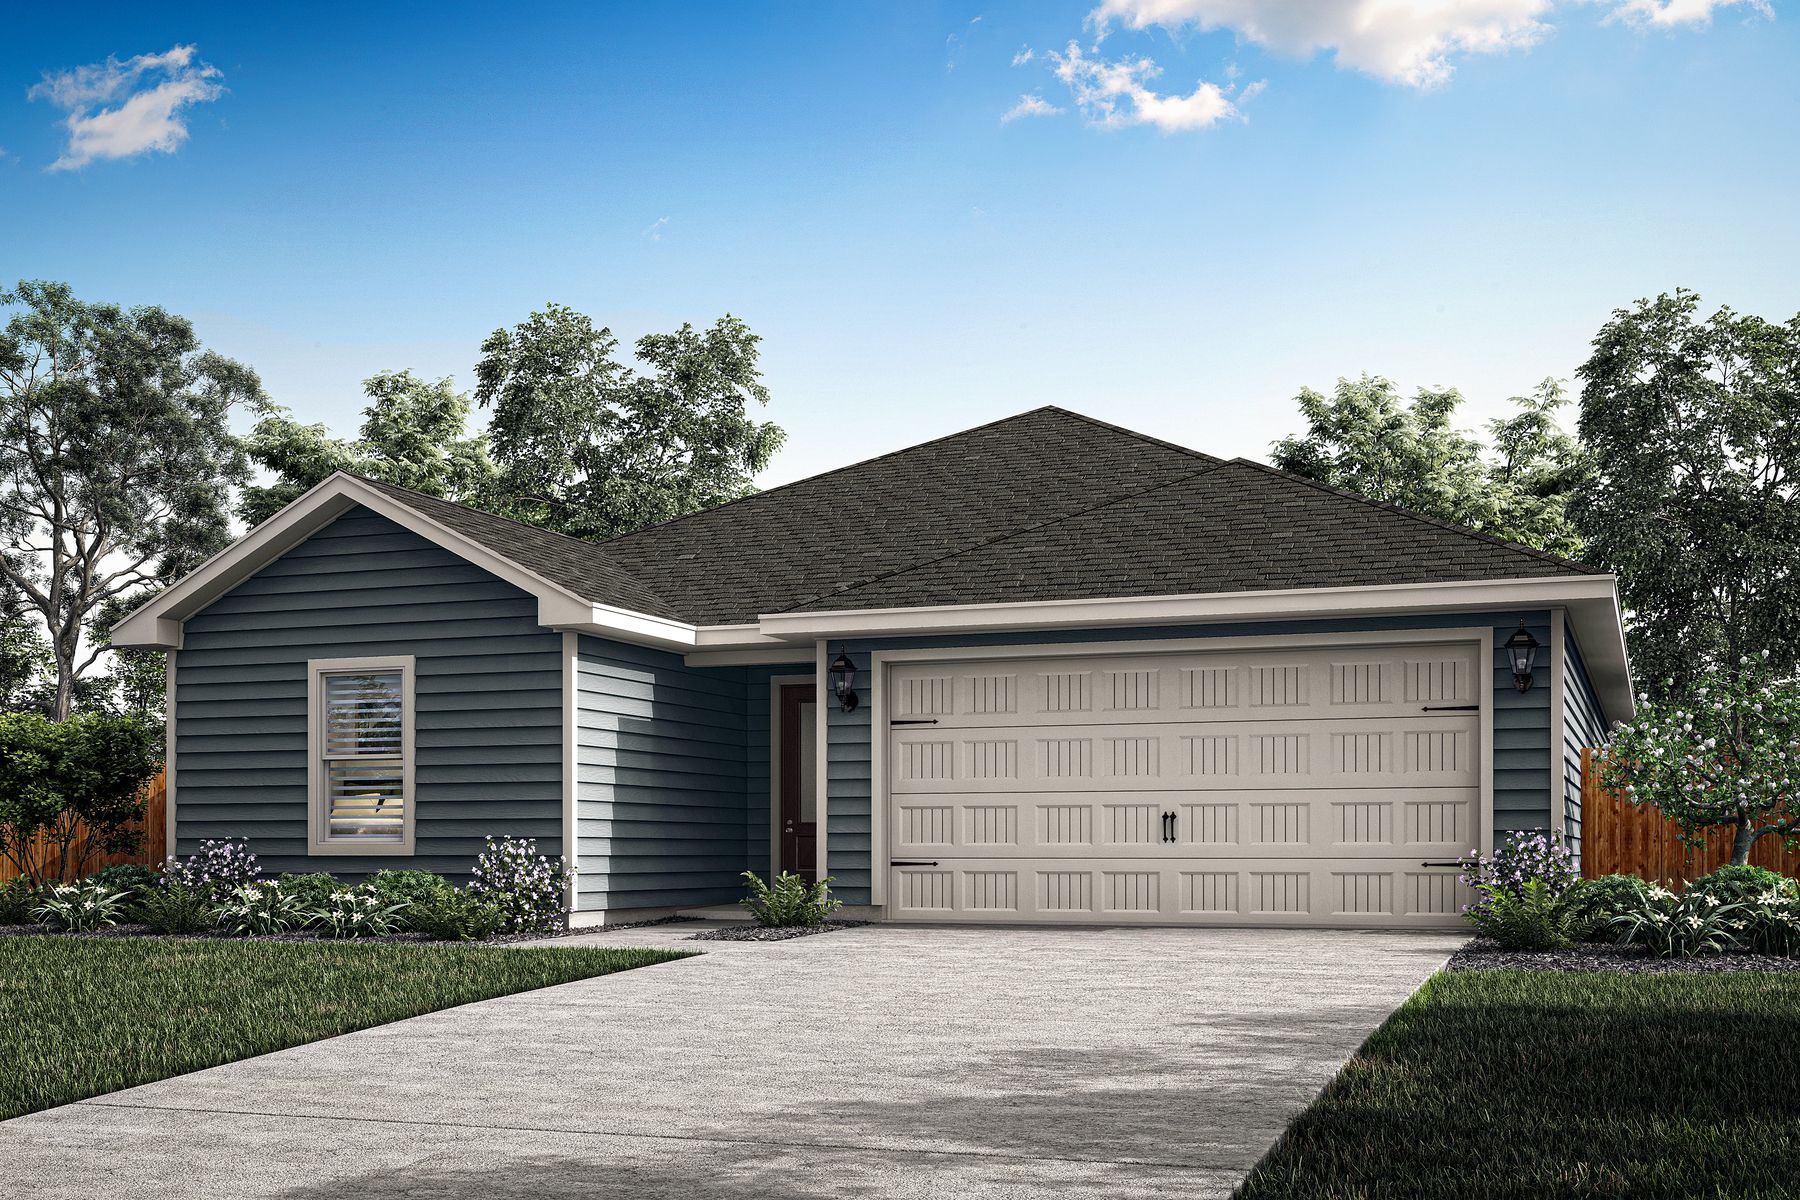 The Sabine by LGI Homes:The Sabine is a one-story floor plan.